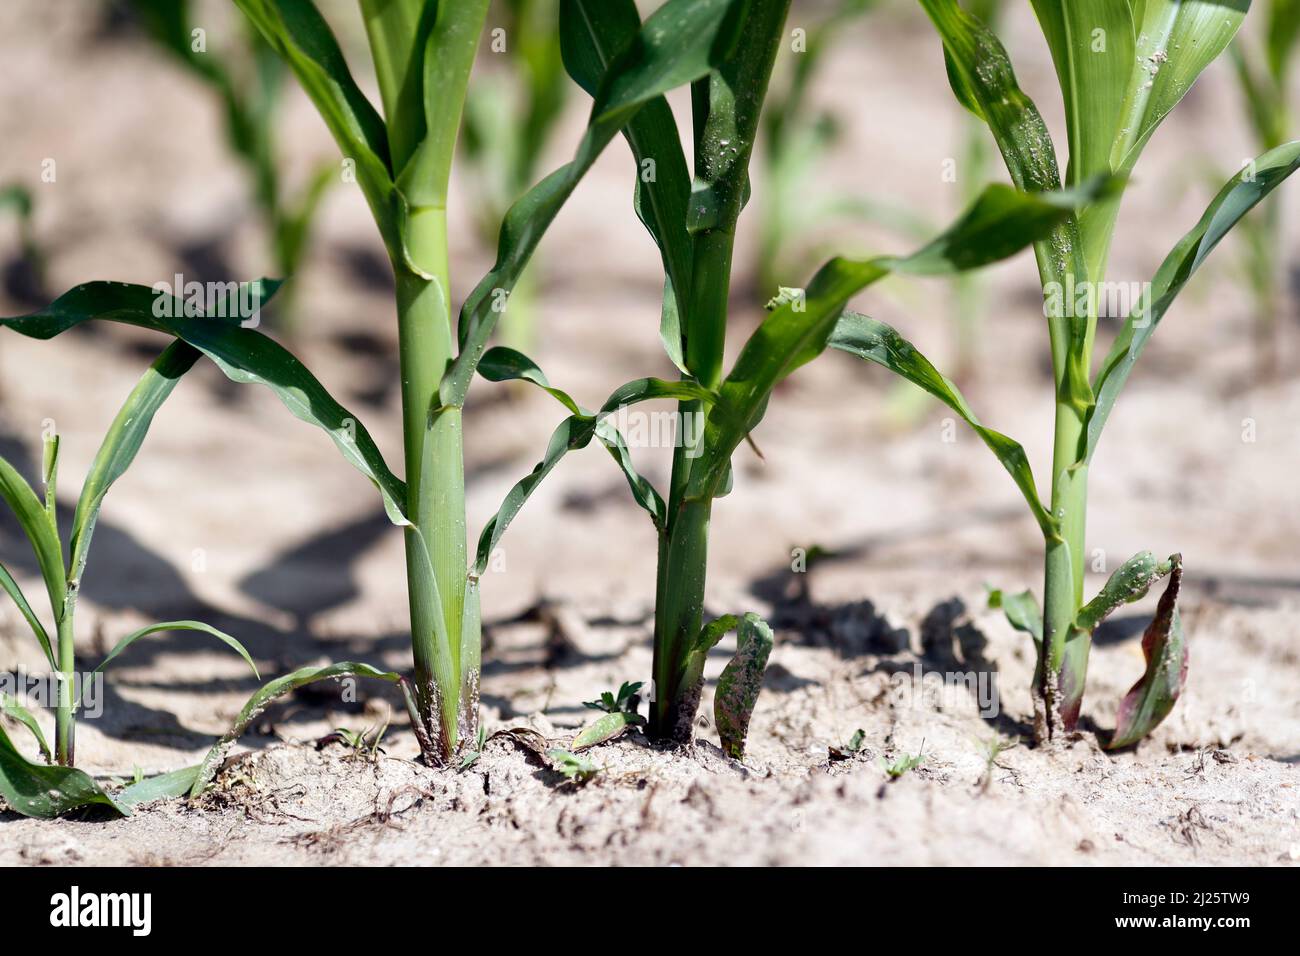 Corn field.  Cultivated plants and agriculture. Stock Photo